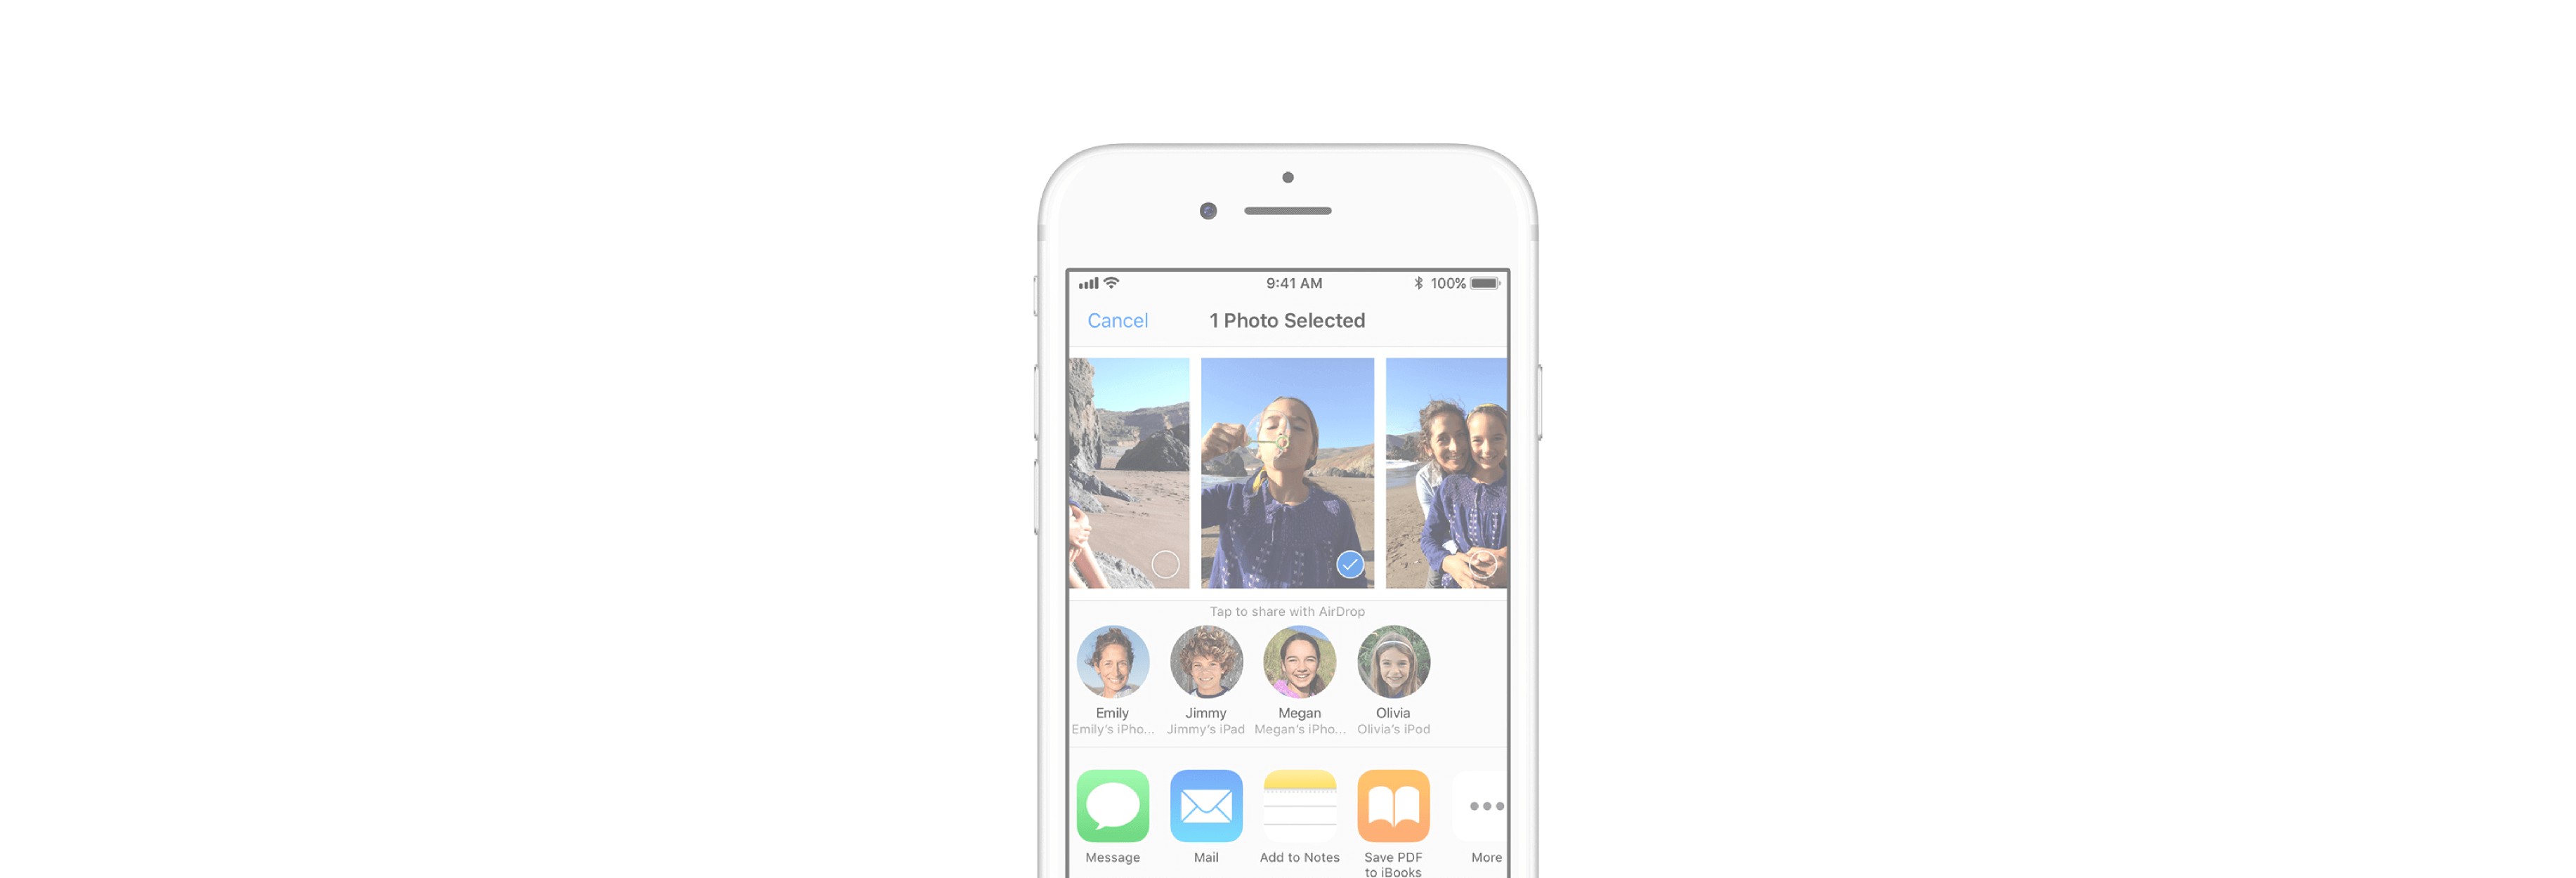 How to instantly share files with AirDrop for iPhone or iPad